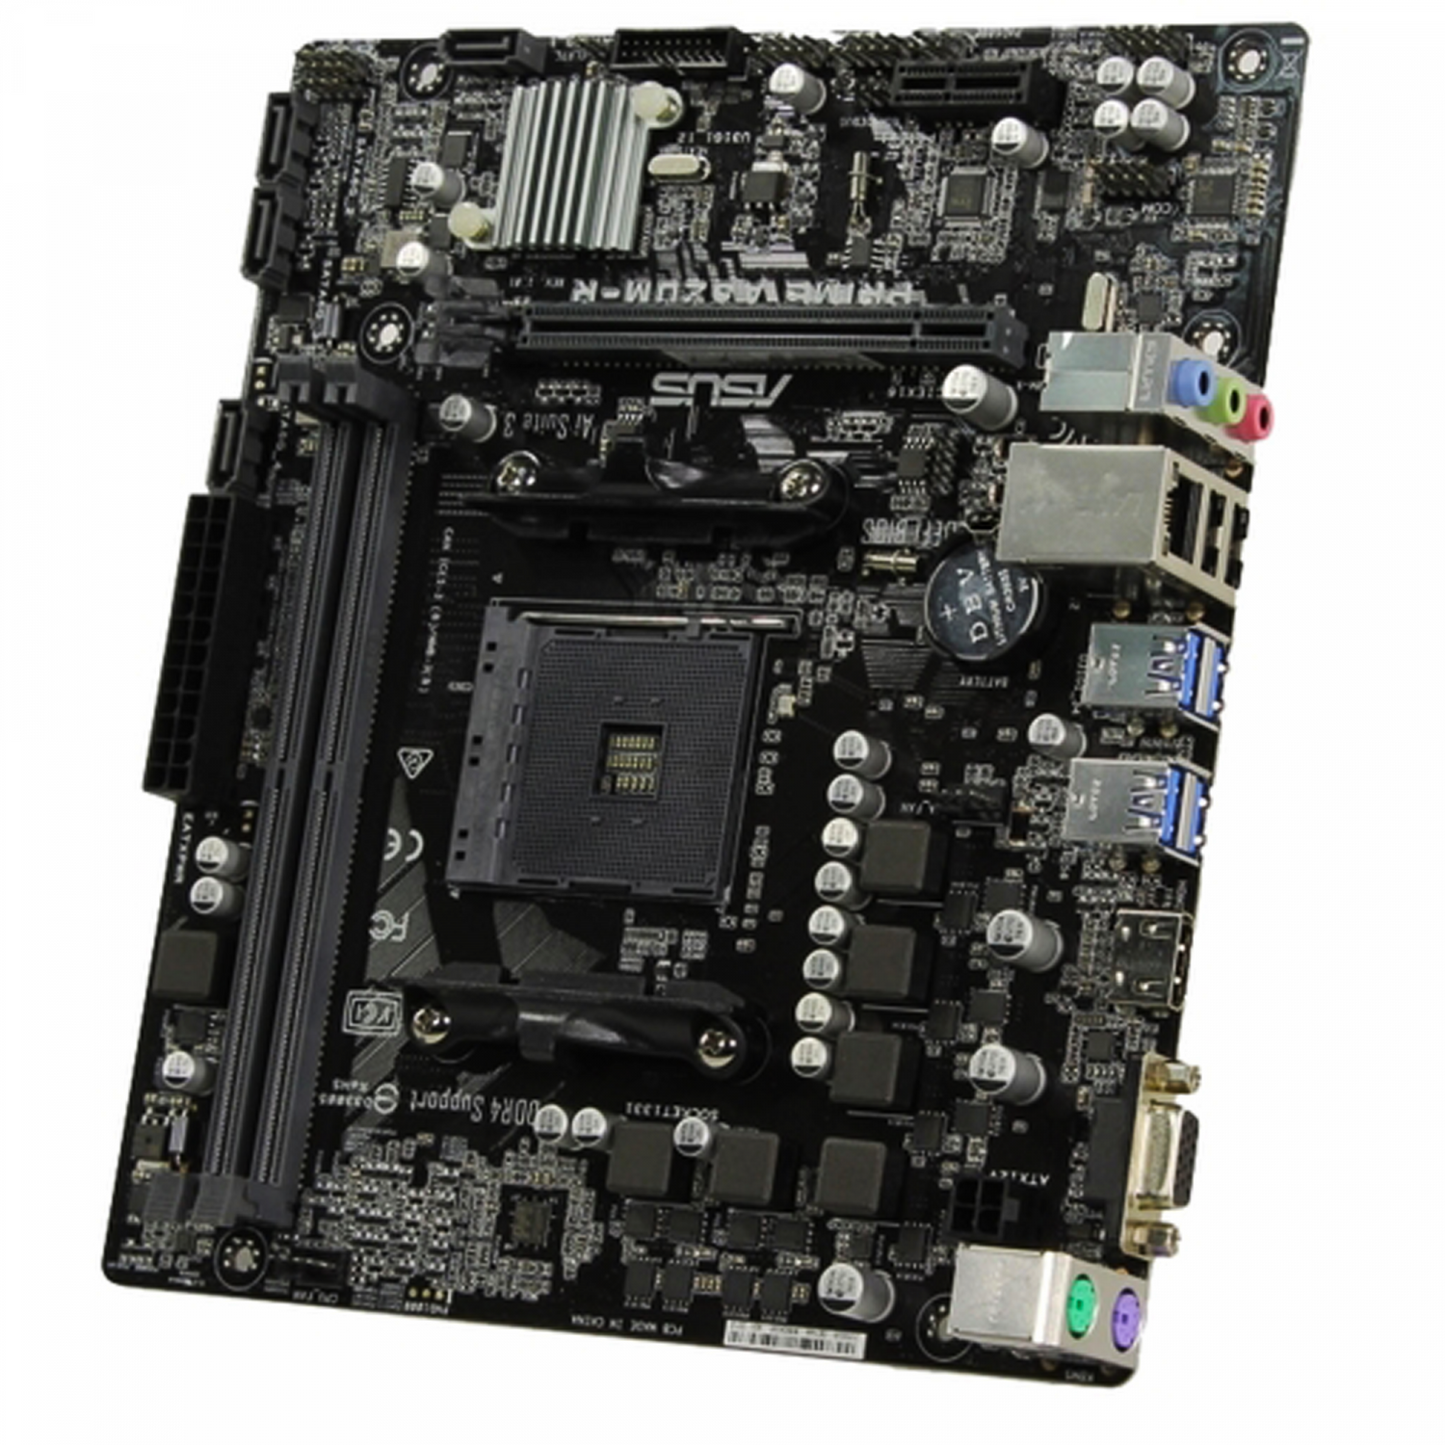 ASUS Prime Moderkort A320M-R-SI